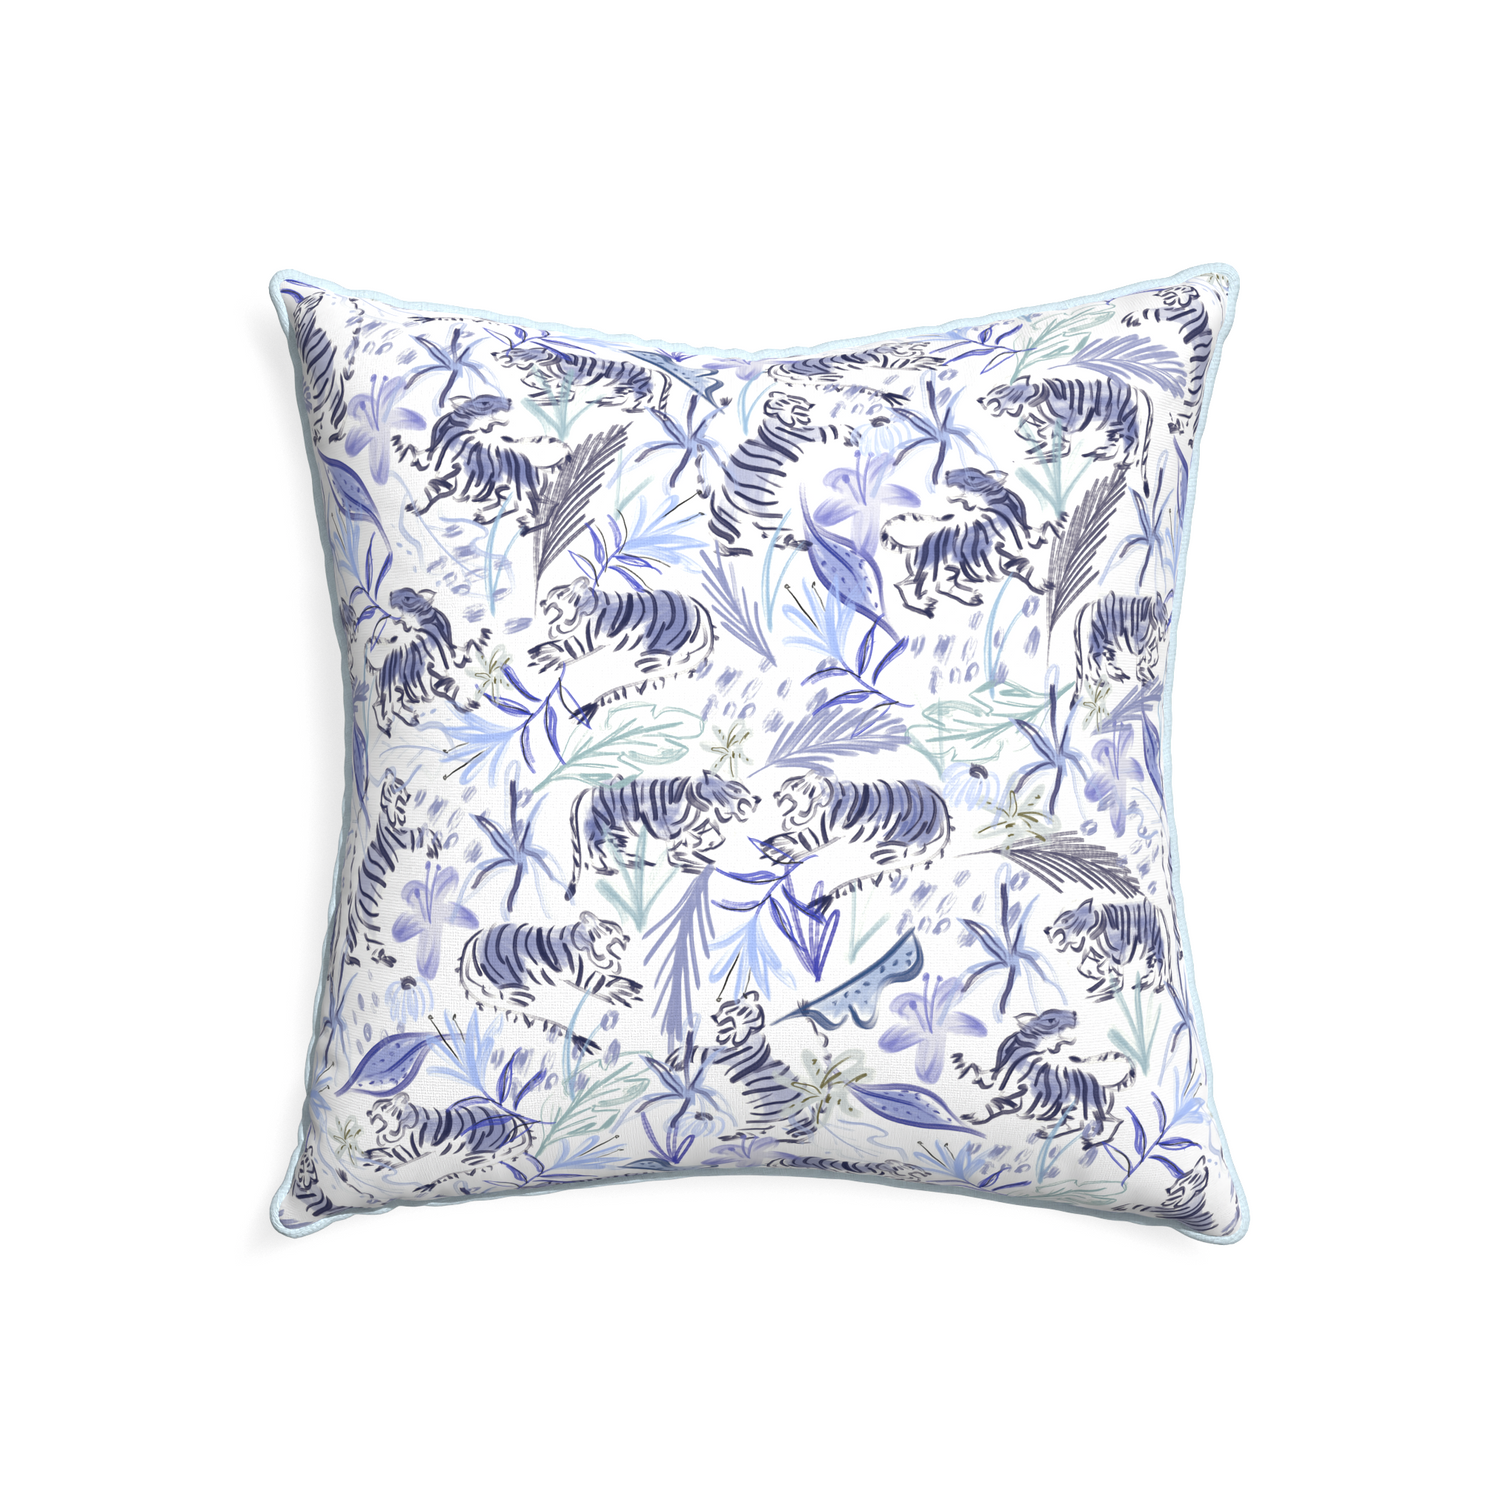 22-square frida blue custom blue with intricate tiger designpillow with powder piping on white background